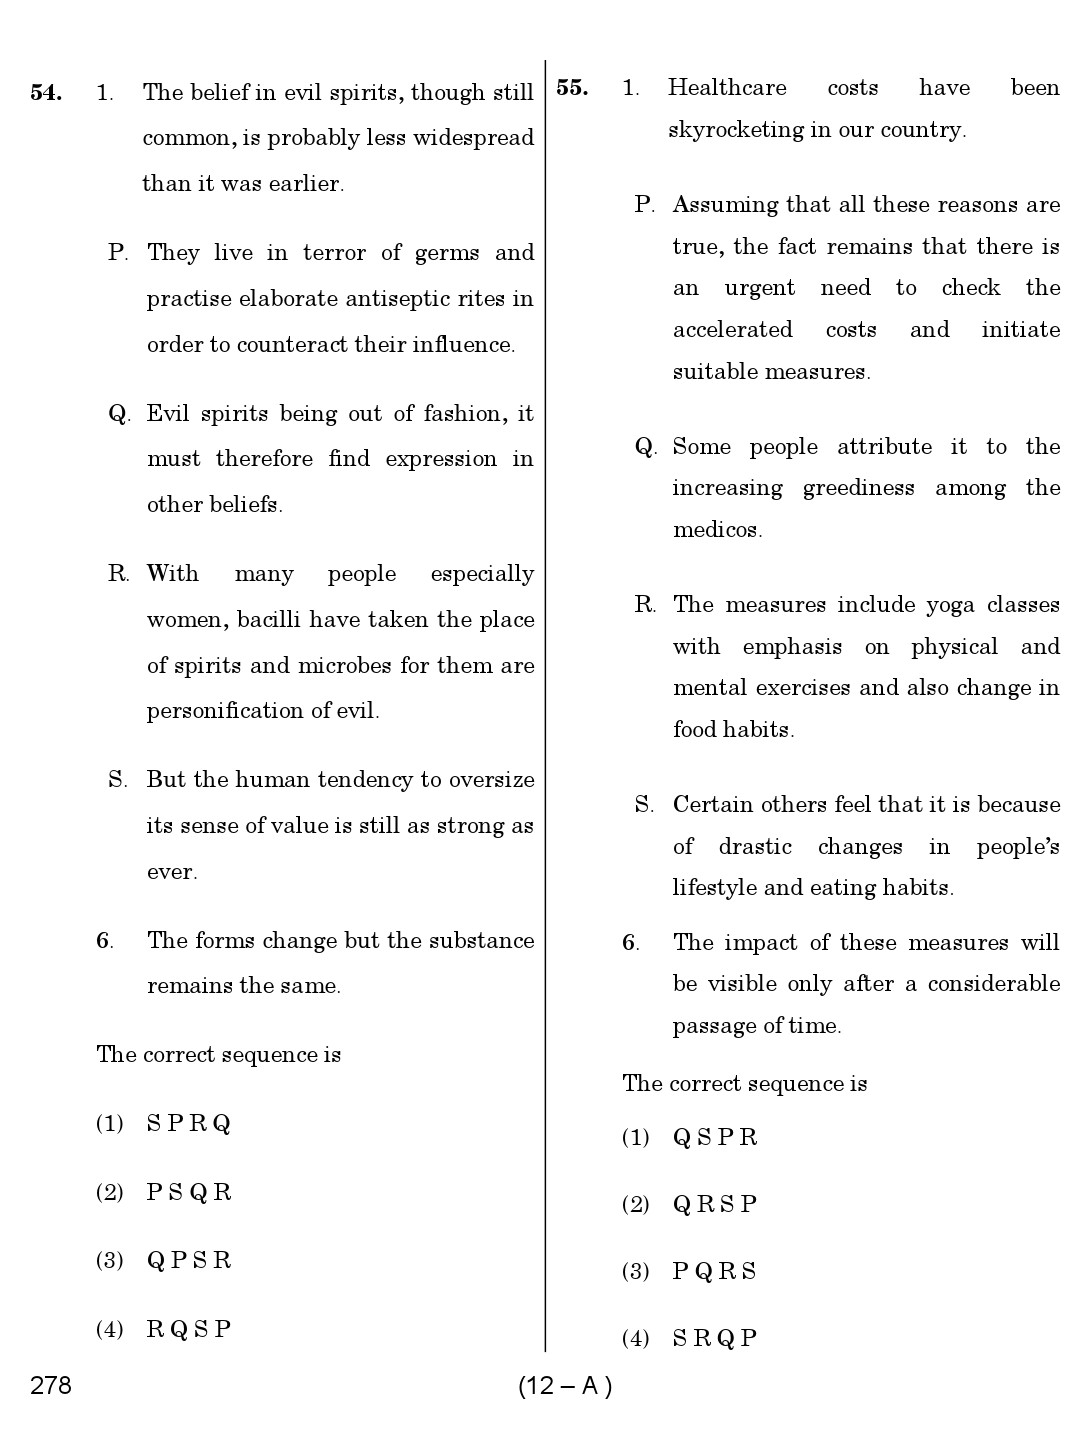 Karnataka PSC First Division Computer Assistants Exam Sample Question Paper 278 12